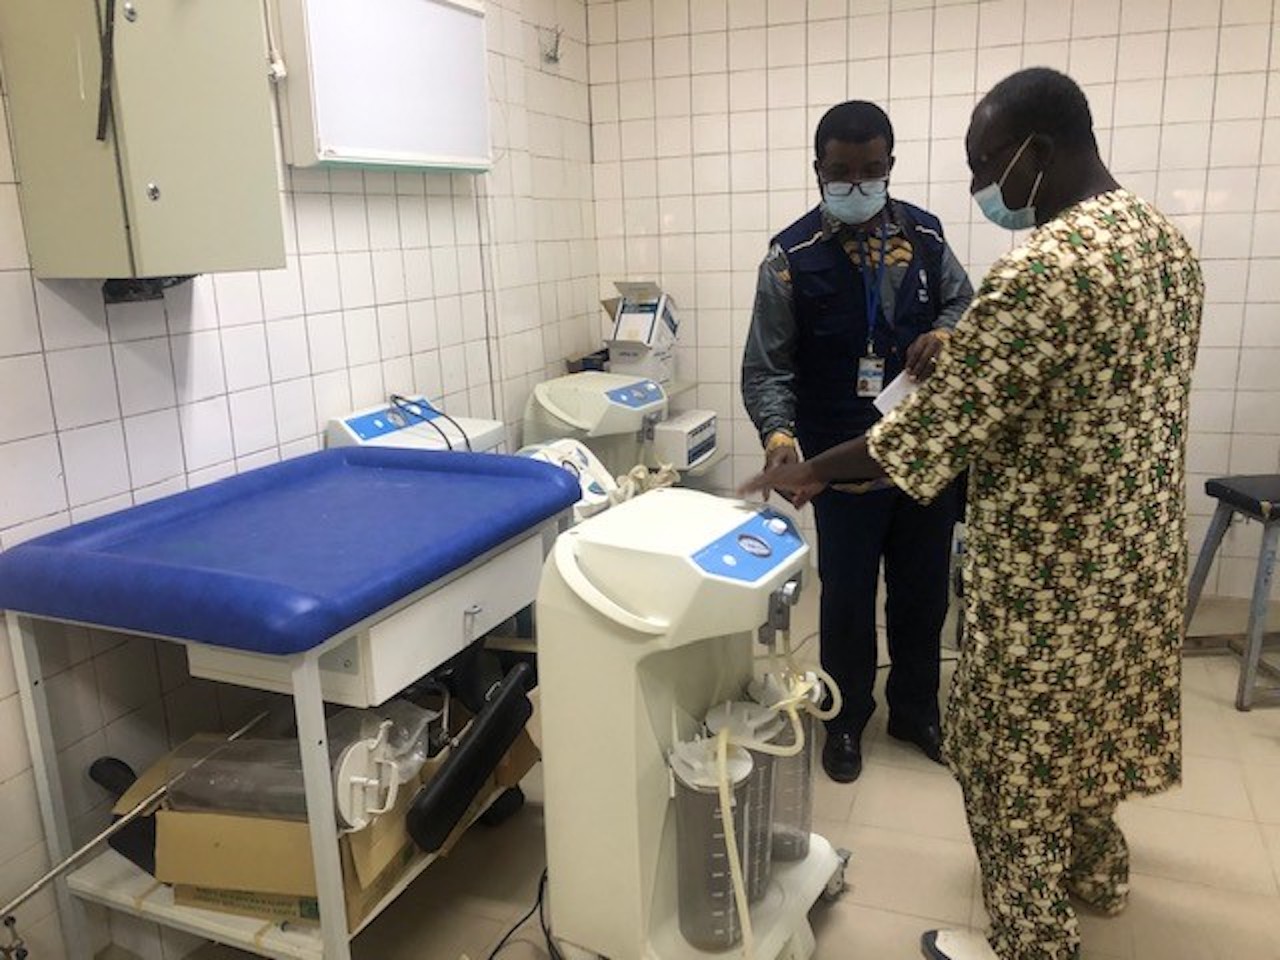 Review of maternal deaths and the continuity of essential reproductive, maternal, and child health services in the context of COVID-19 and the Humanitarian Crisis in the Sahel, Burkina Faso